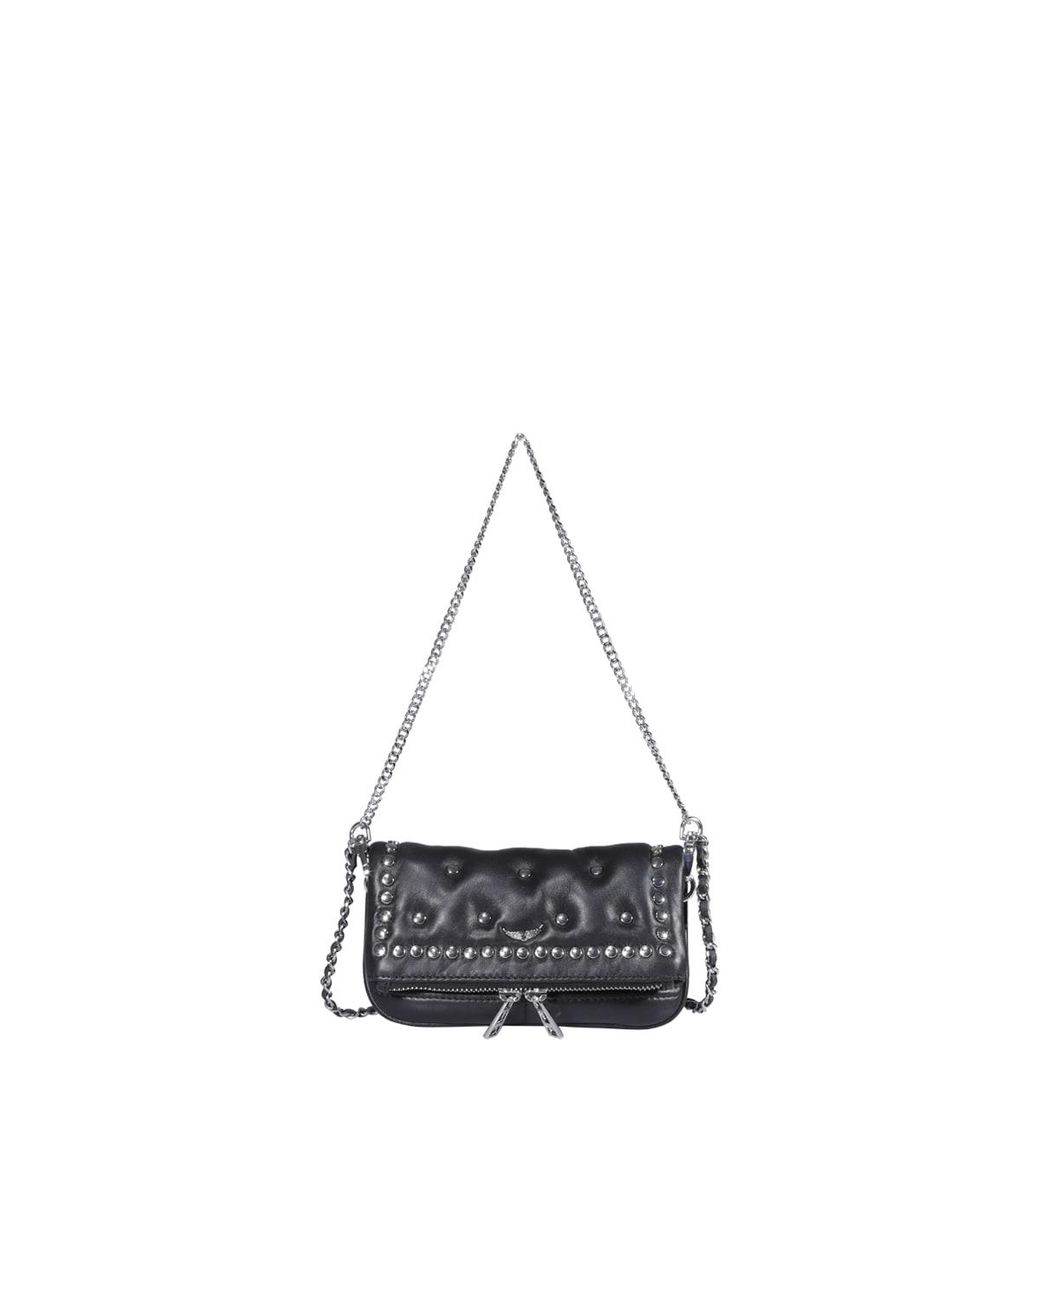 Zadig & Voltaire Padded Quilted Black Leather Crossbody